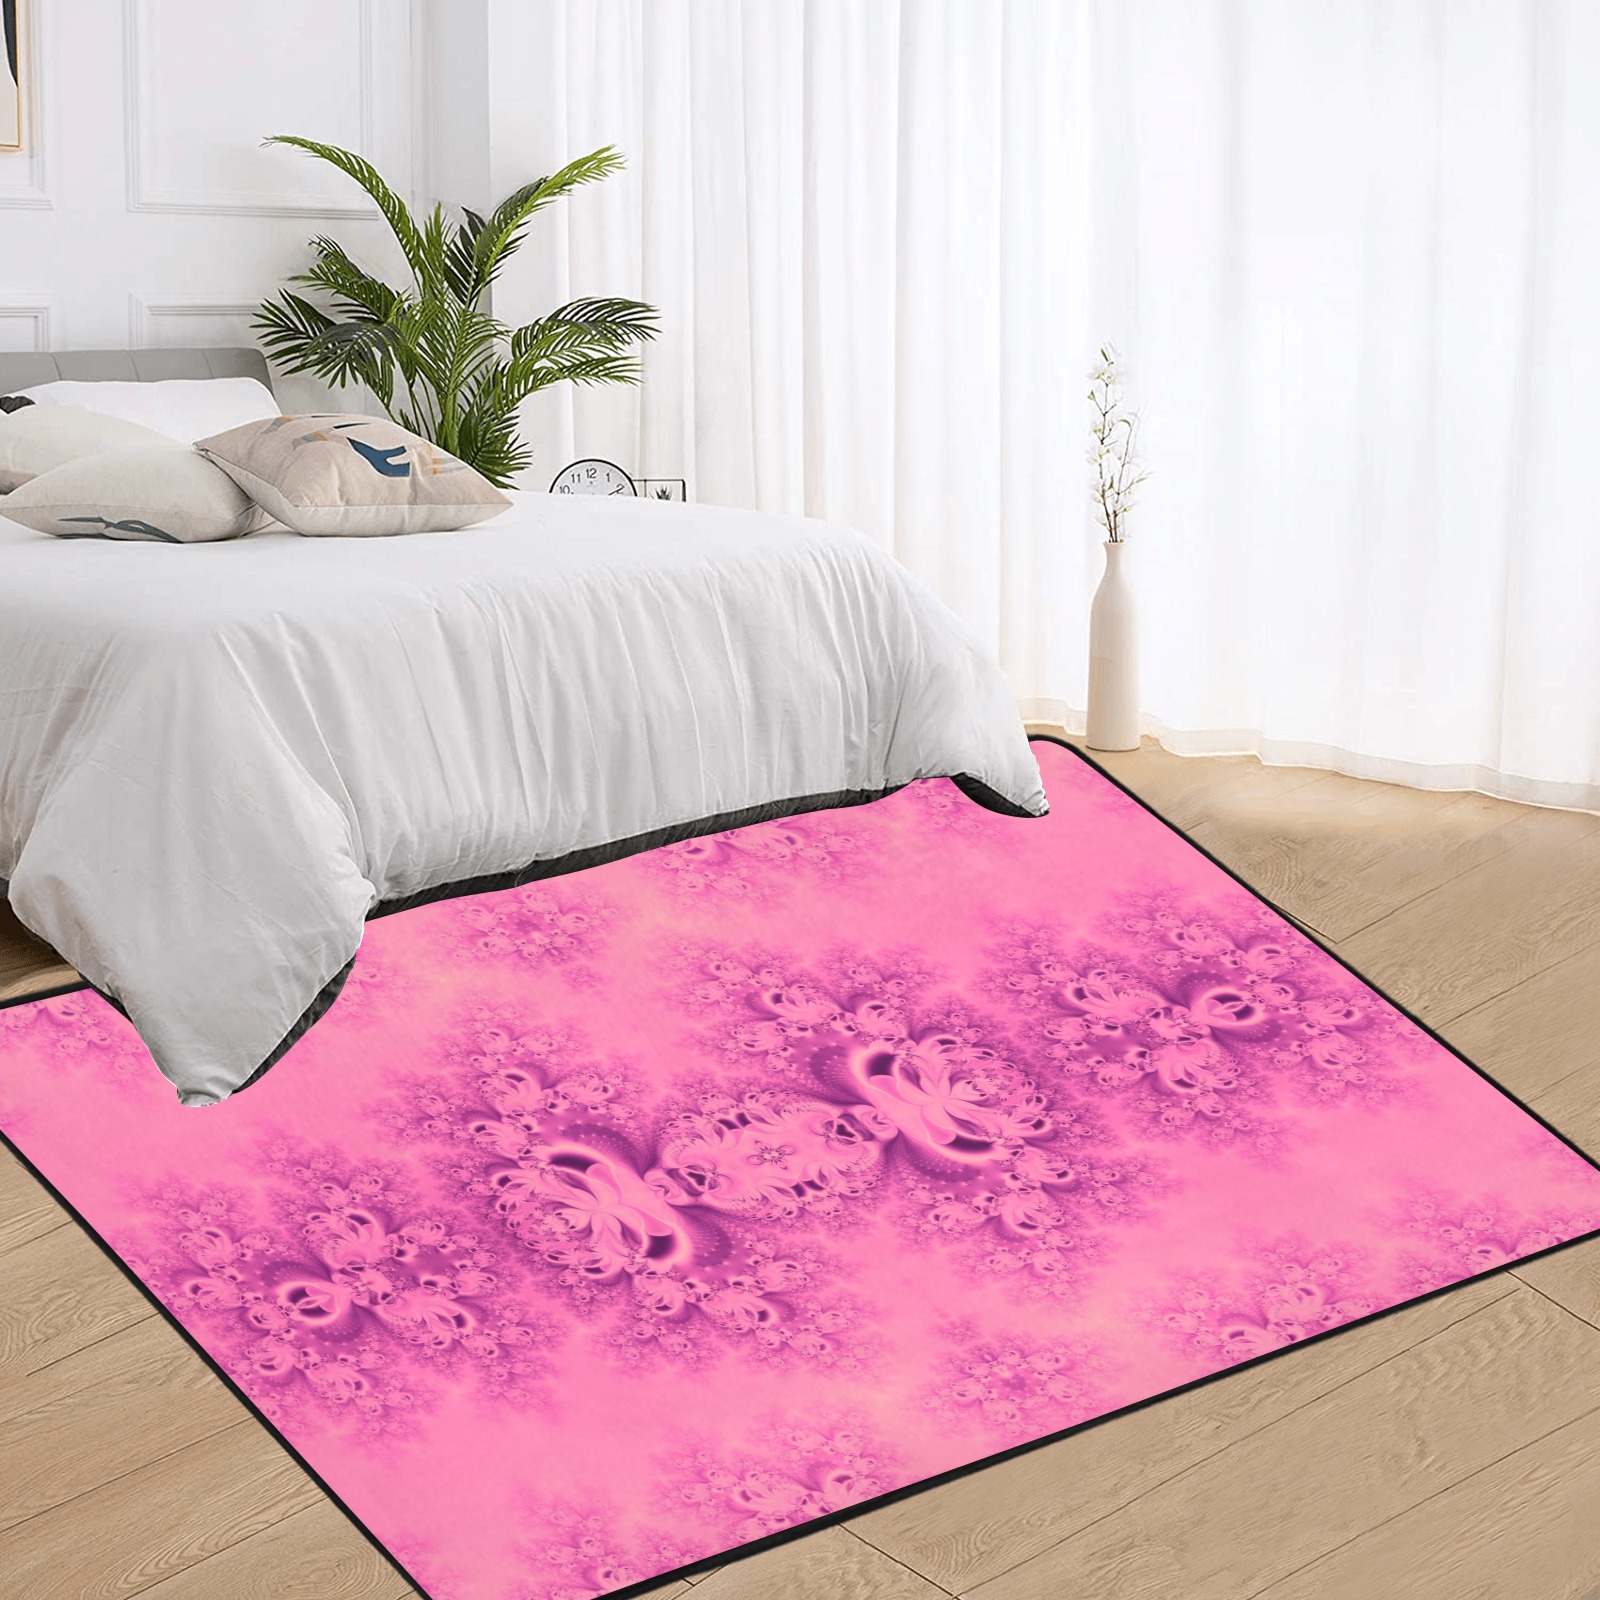 Pink Morning Frost Fractal Area Rug with Black Binding 7'x5'